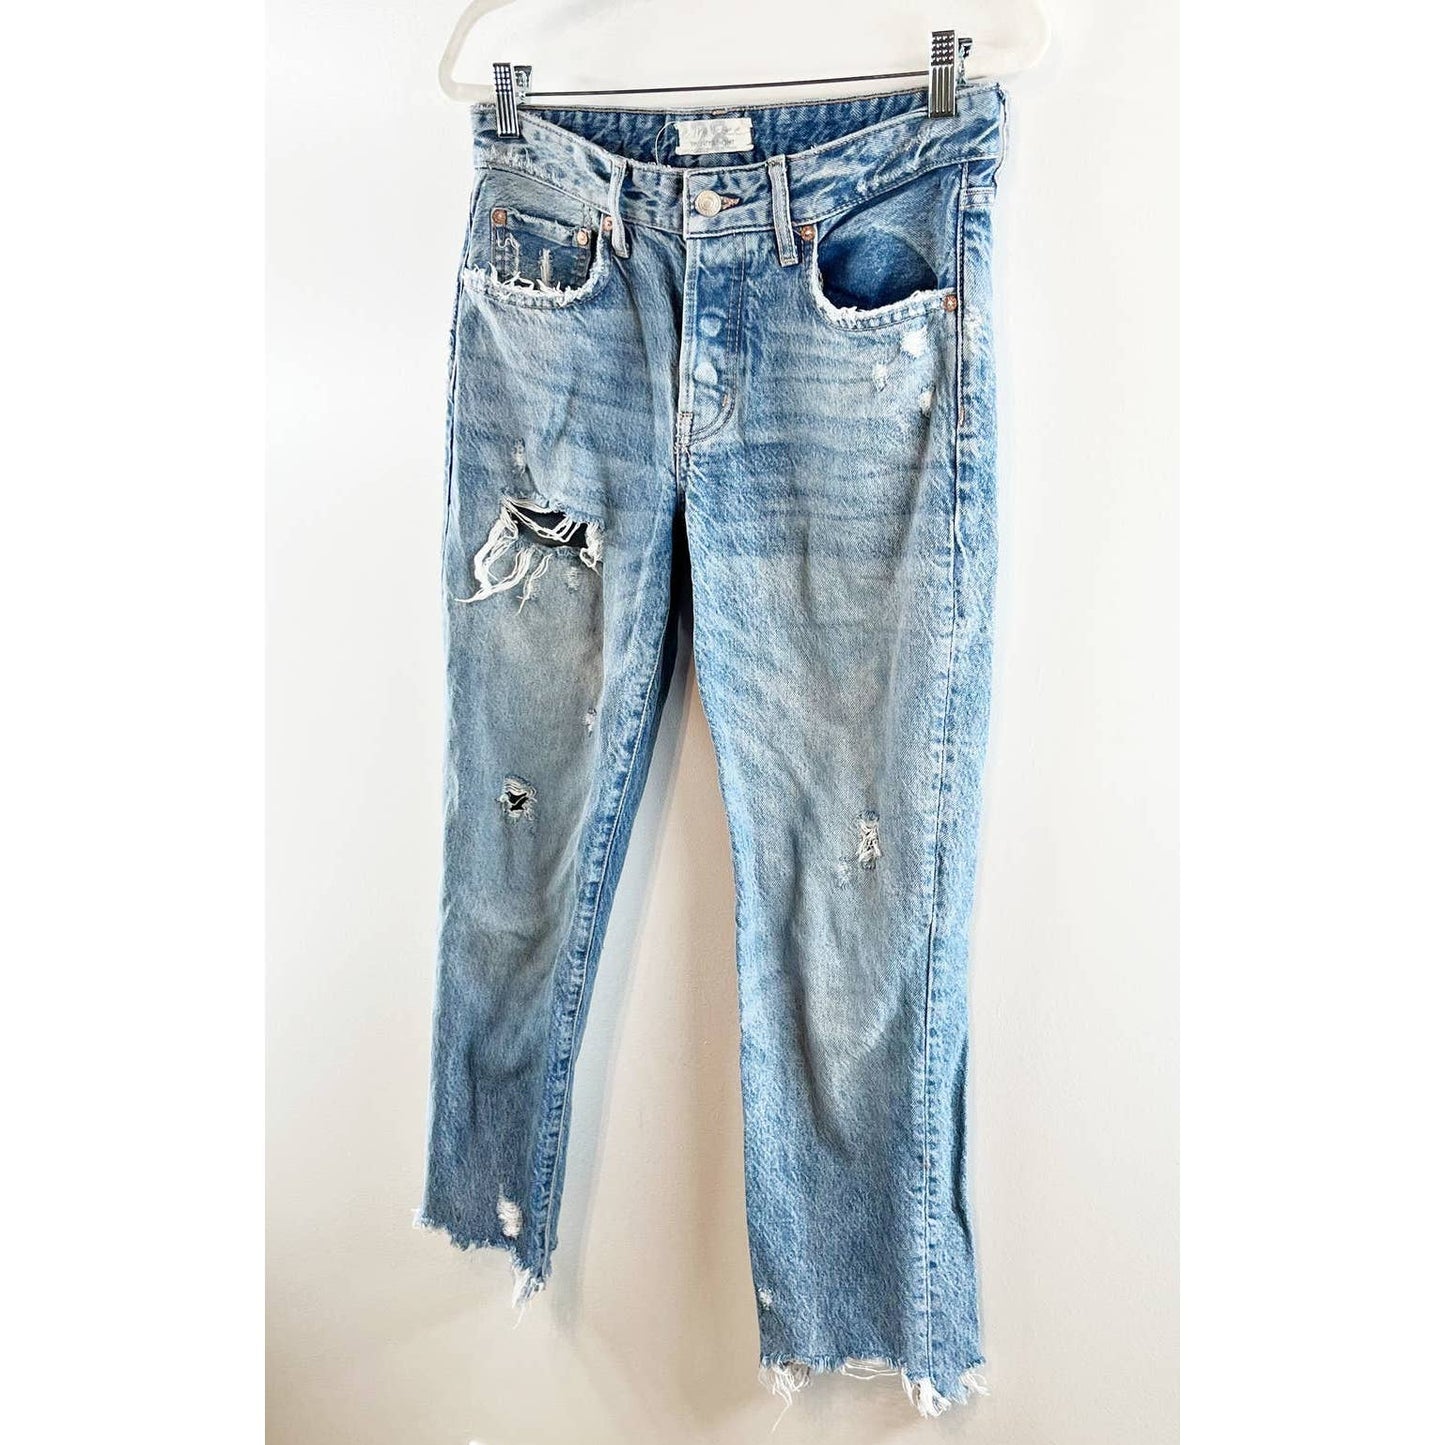 Free People Good Times Relaxed Distressed Cropped Skinny Jeans Blue 28 / 6